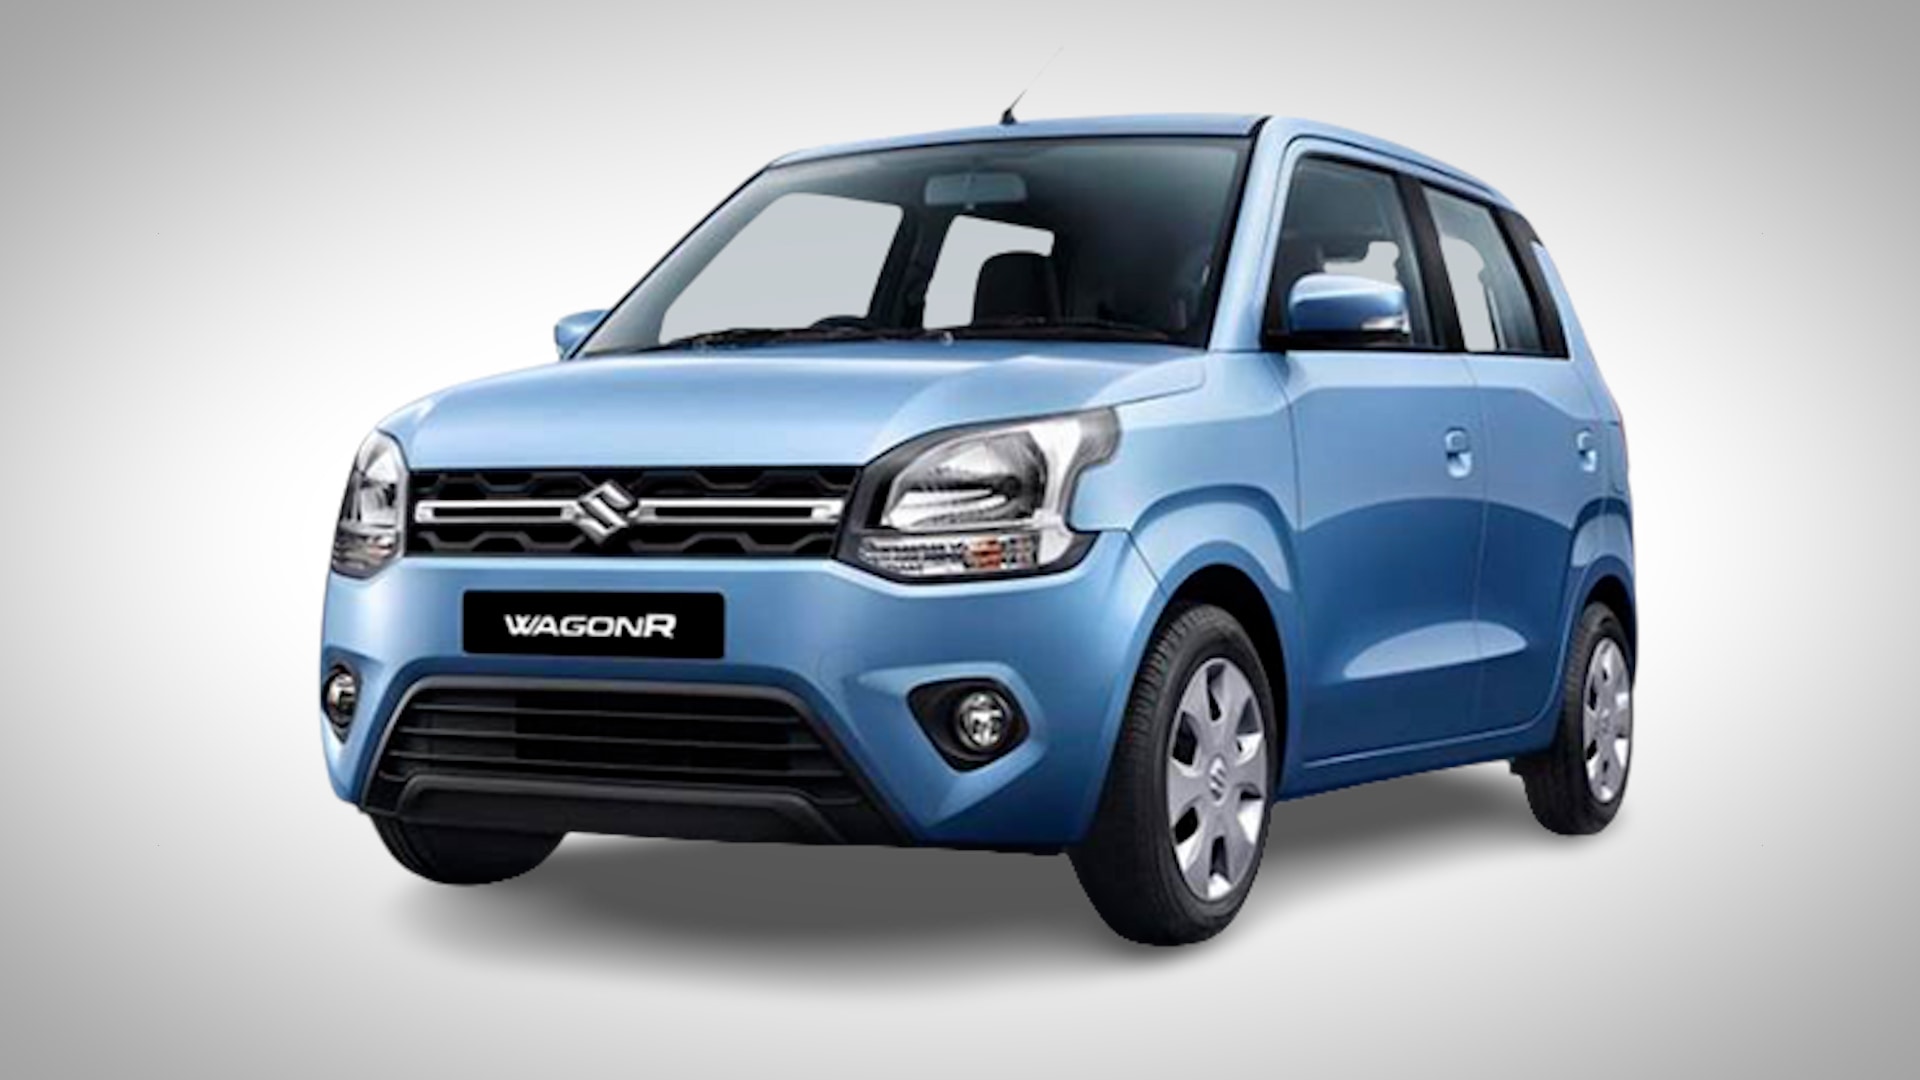 The new-generation Maruti WagonR is one of the best-selling cars in India. It offers the user a five-speed AMT unit and its price starts from around <span class=